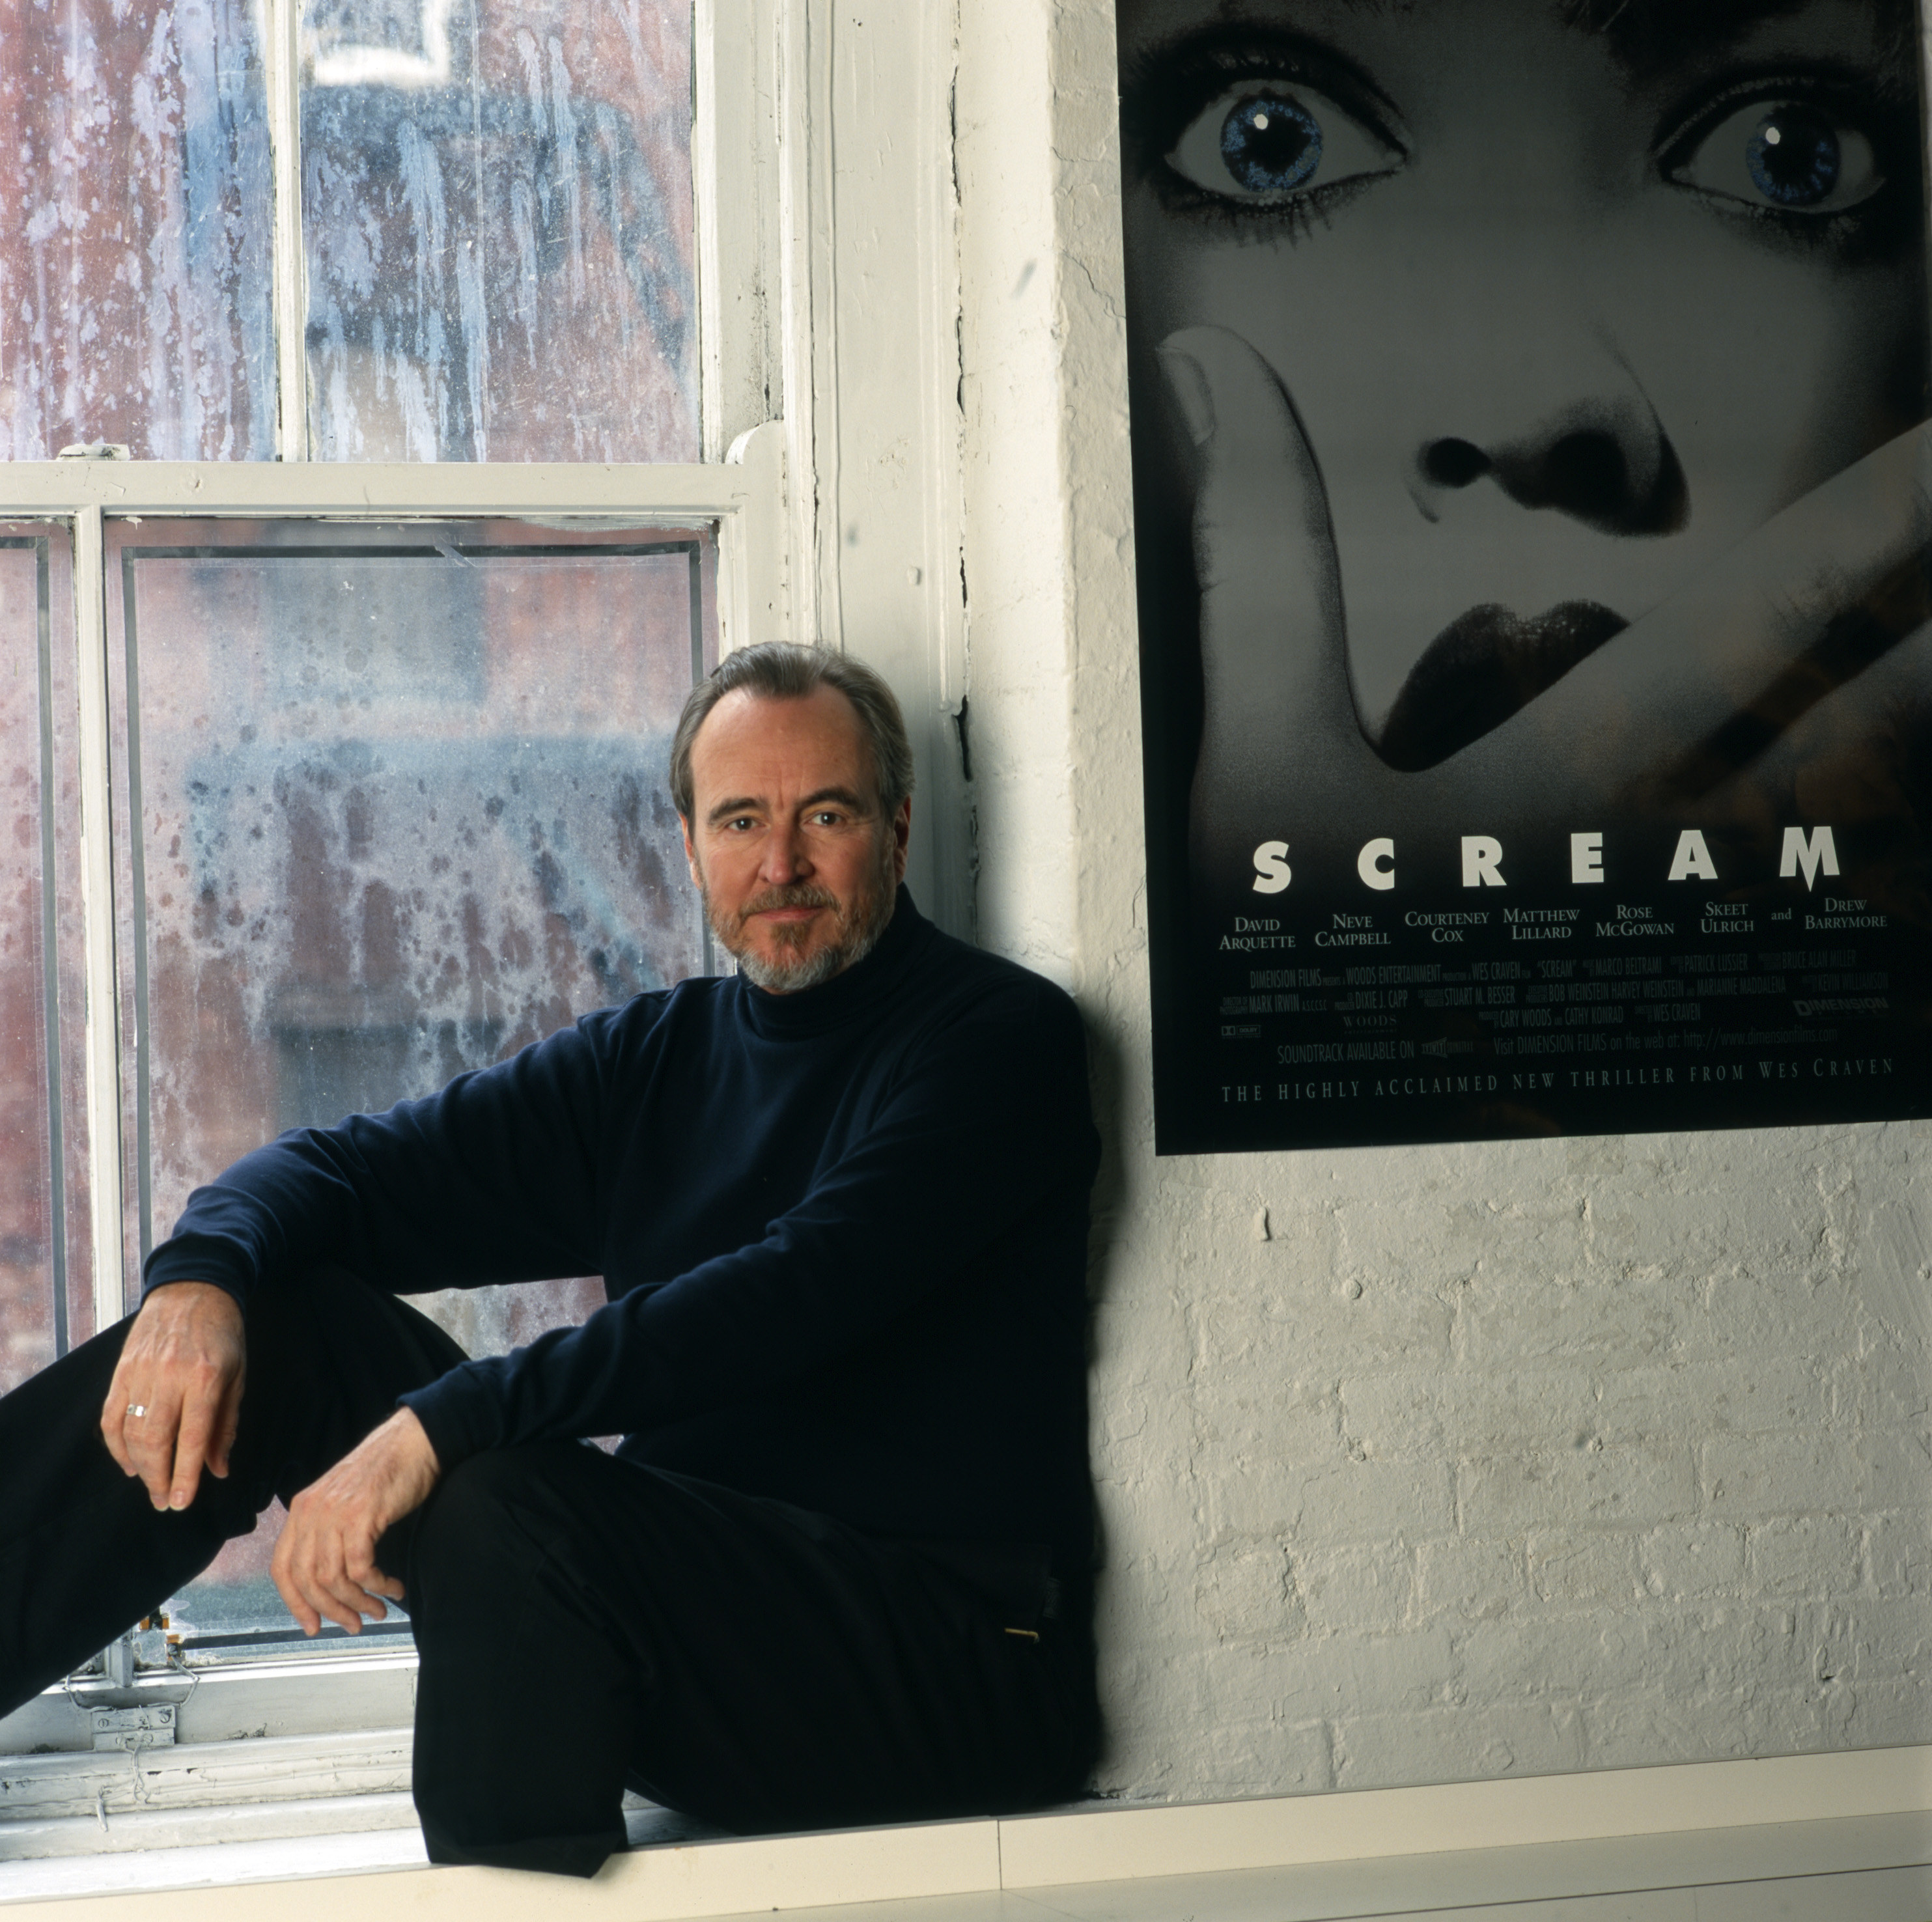 Wes Craven sitting near a Scream poster